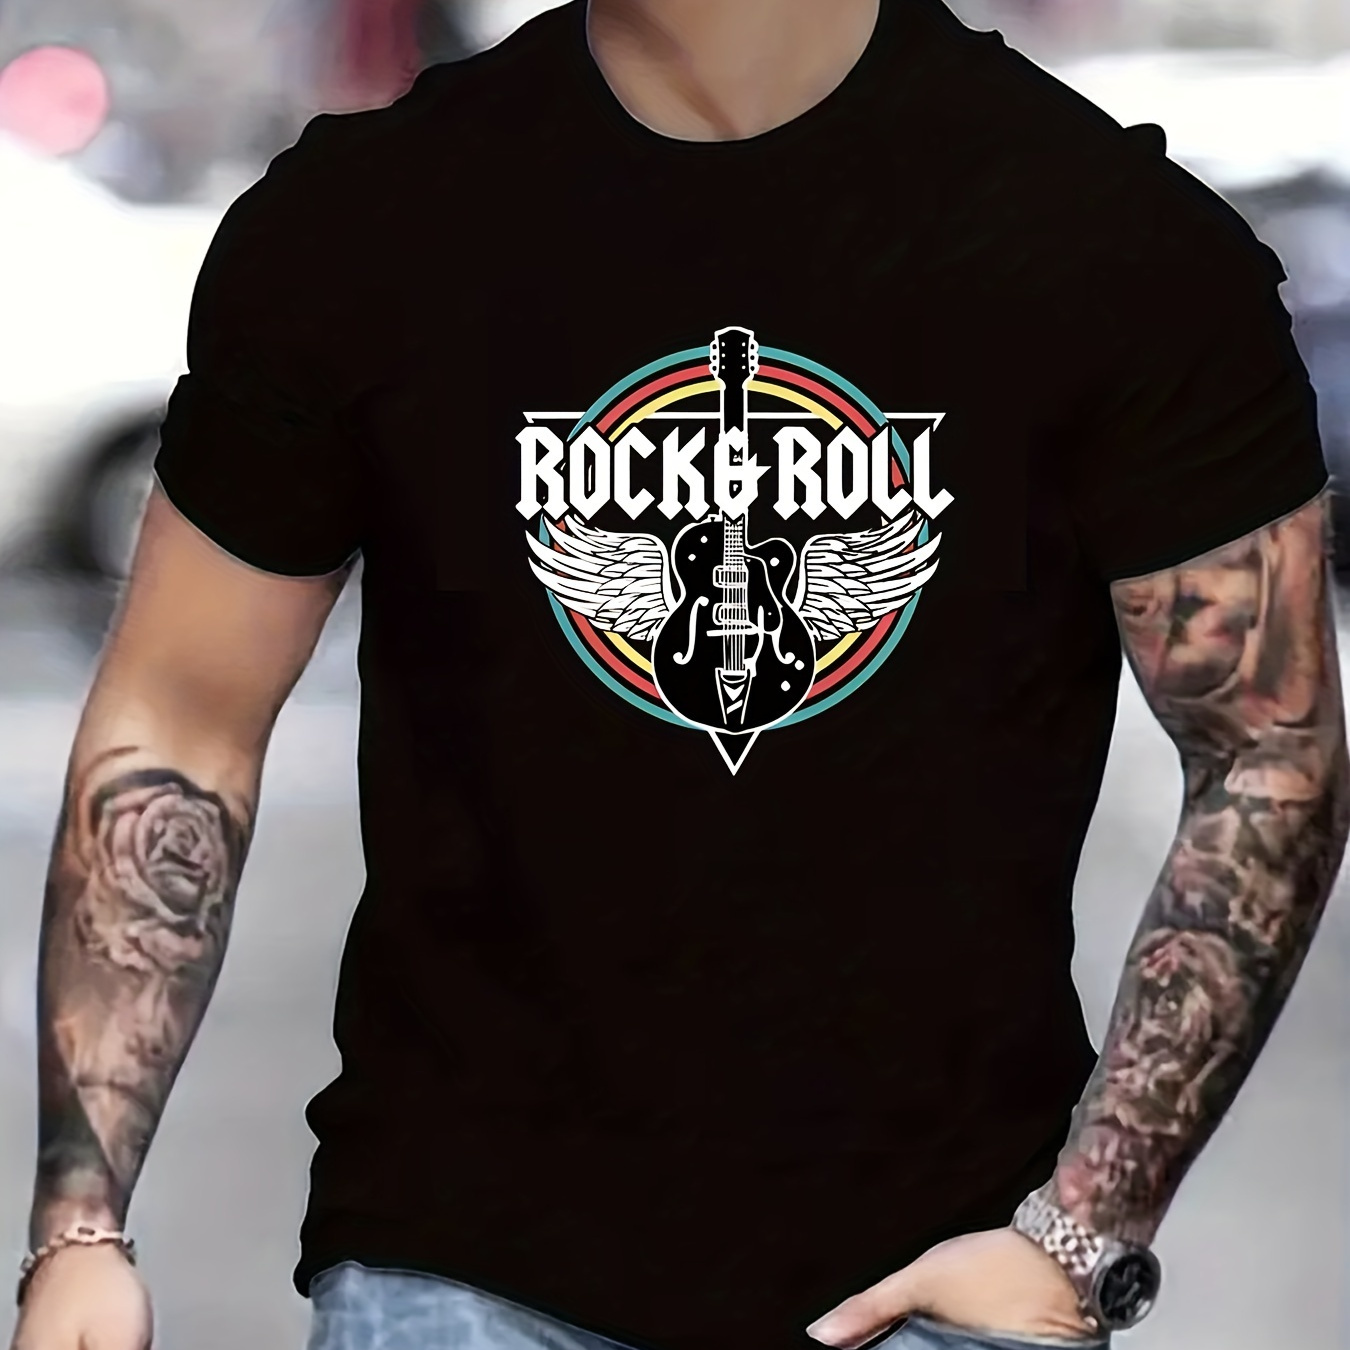 

Rock Roll Print, Men's Round Crew Neck Short Sleeve, Simple Style Tee Fashion Regular Fit T-shirt Casual Comfy Top For Spring Summer Holiday Leisure Vacation